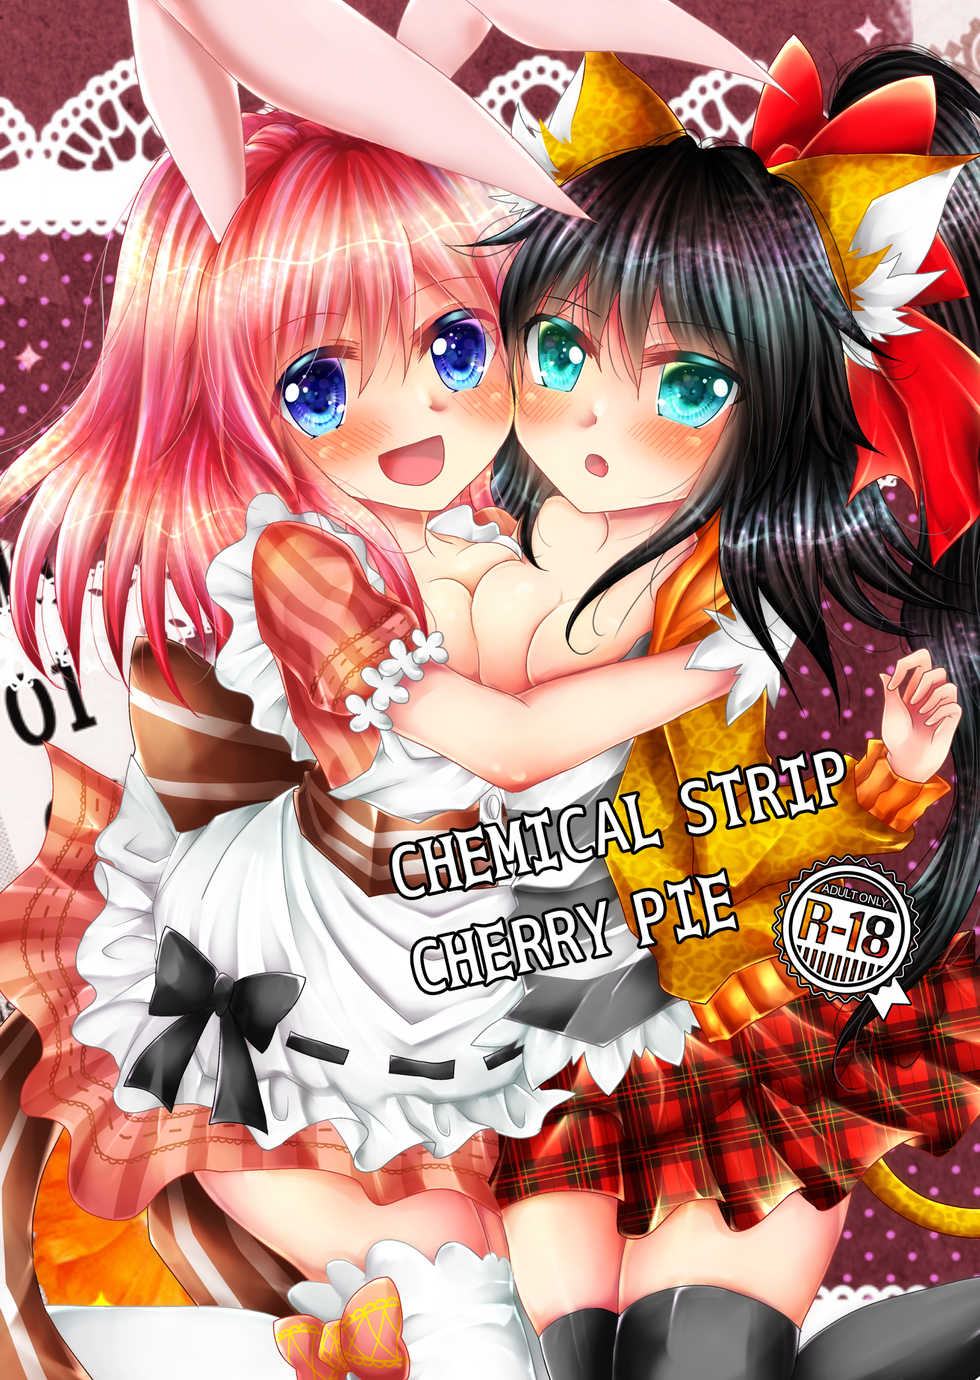 [Thrylos (Suu)] CHEMICAL STRIP CHERRY PIE+ (Emil Chronicle Online) - Page 1